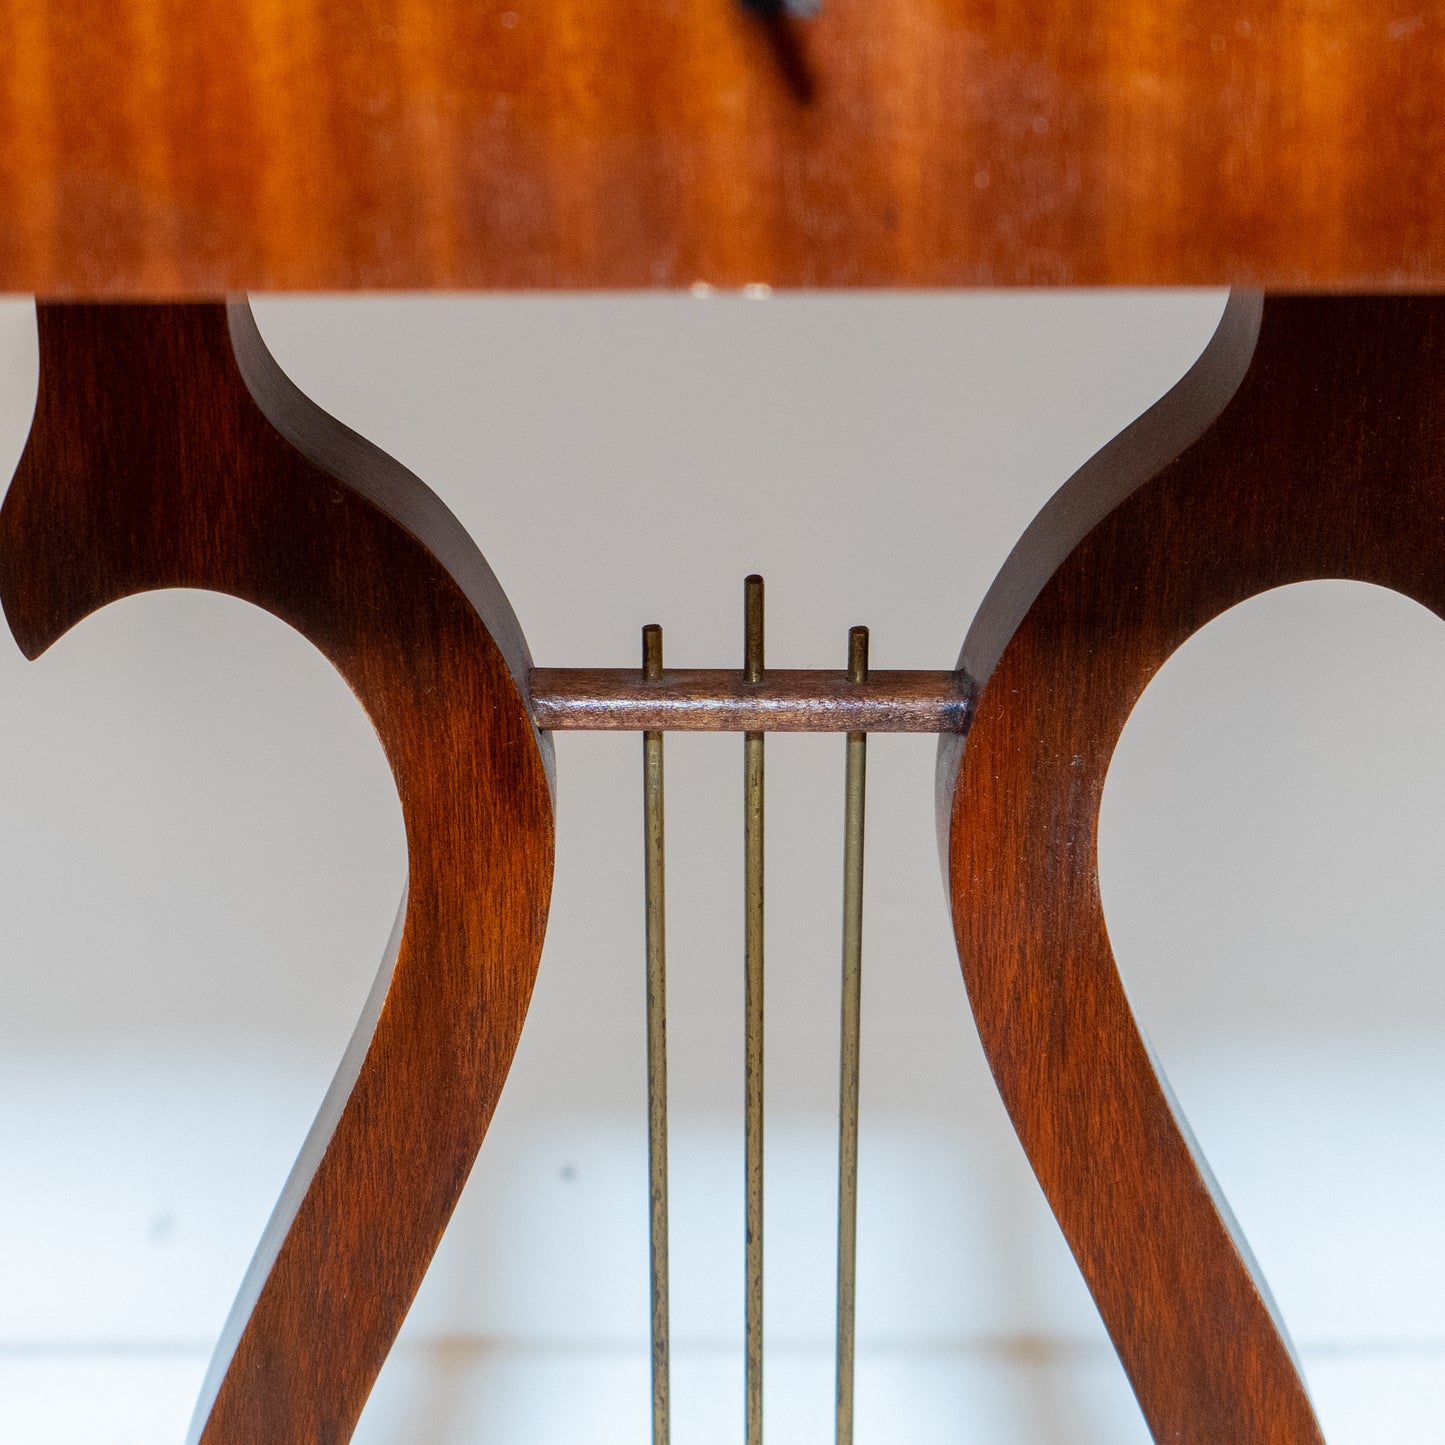 Neoclassical Lyre Table, Sweden 1935